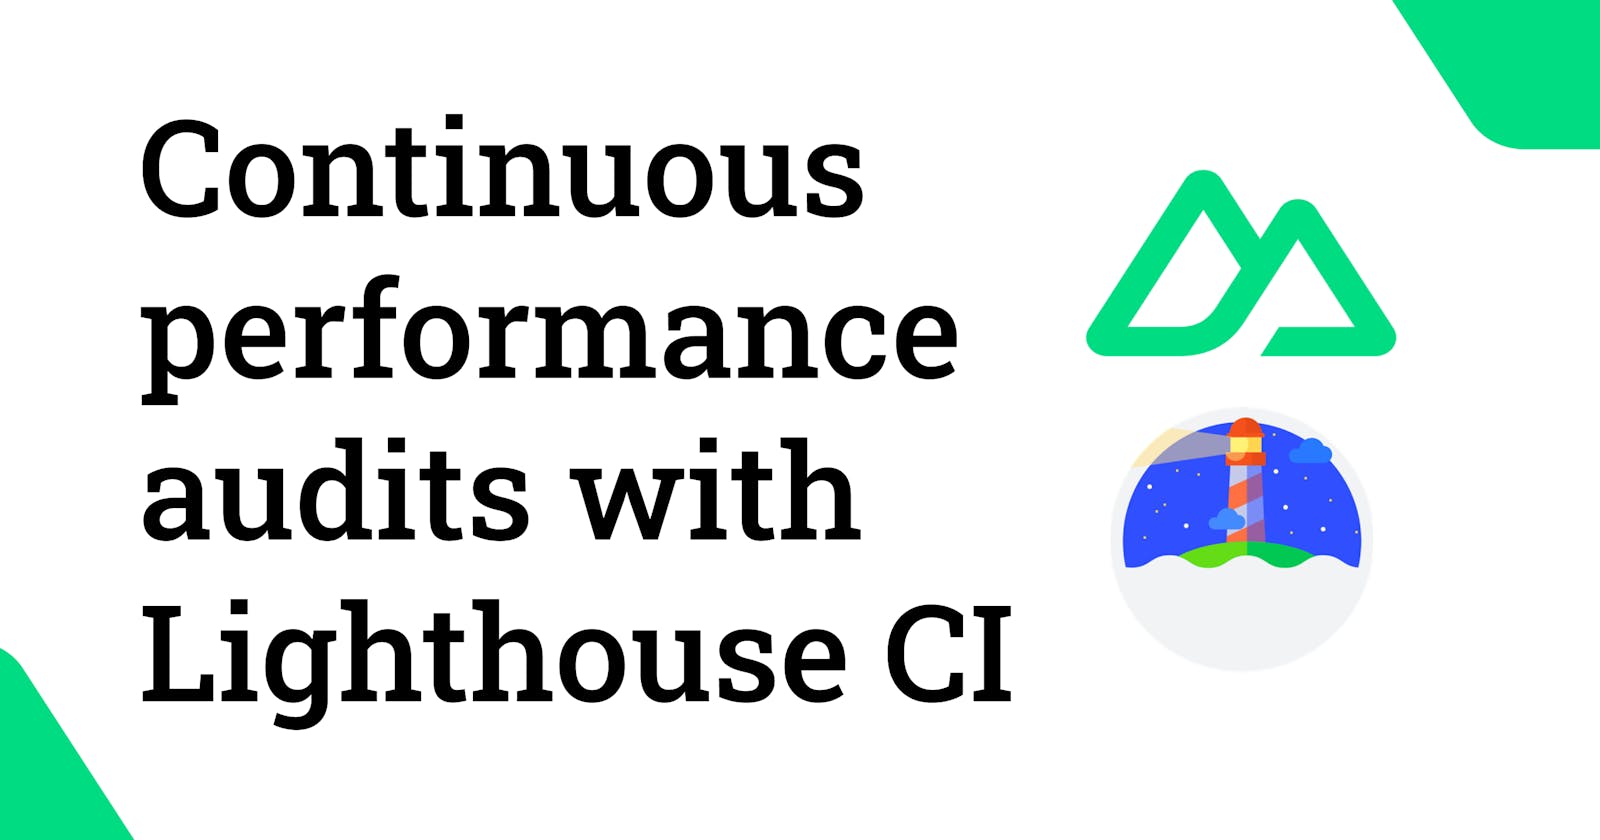 Continuous performance audits with Lighthouse CI